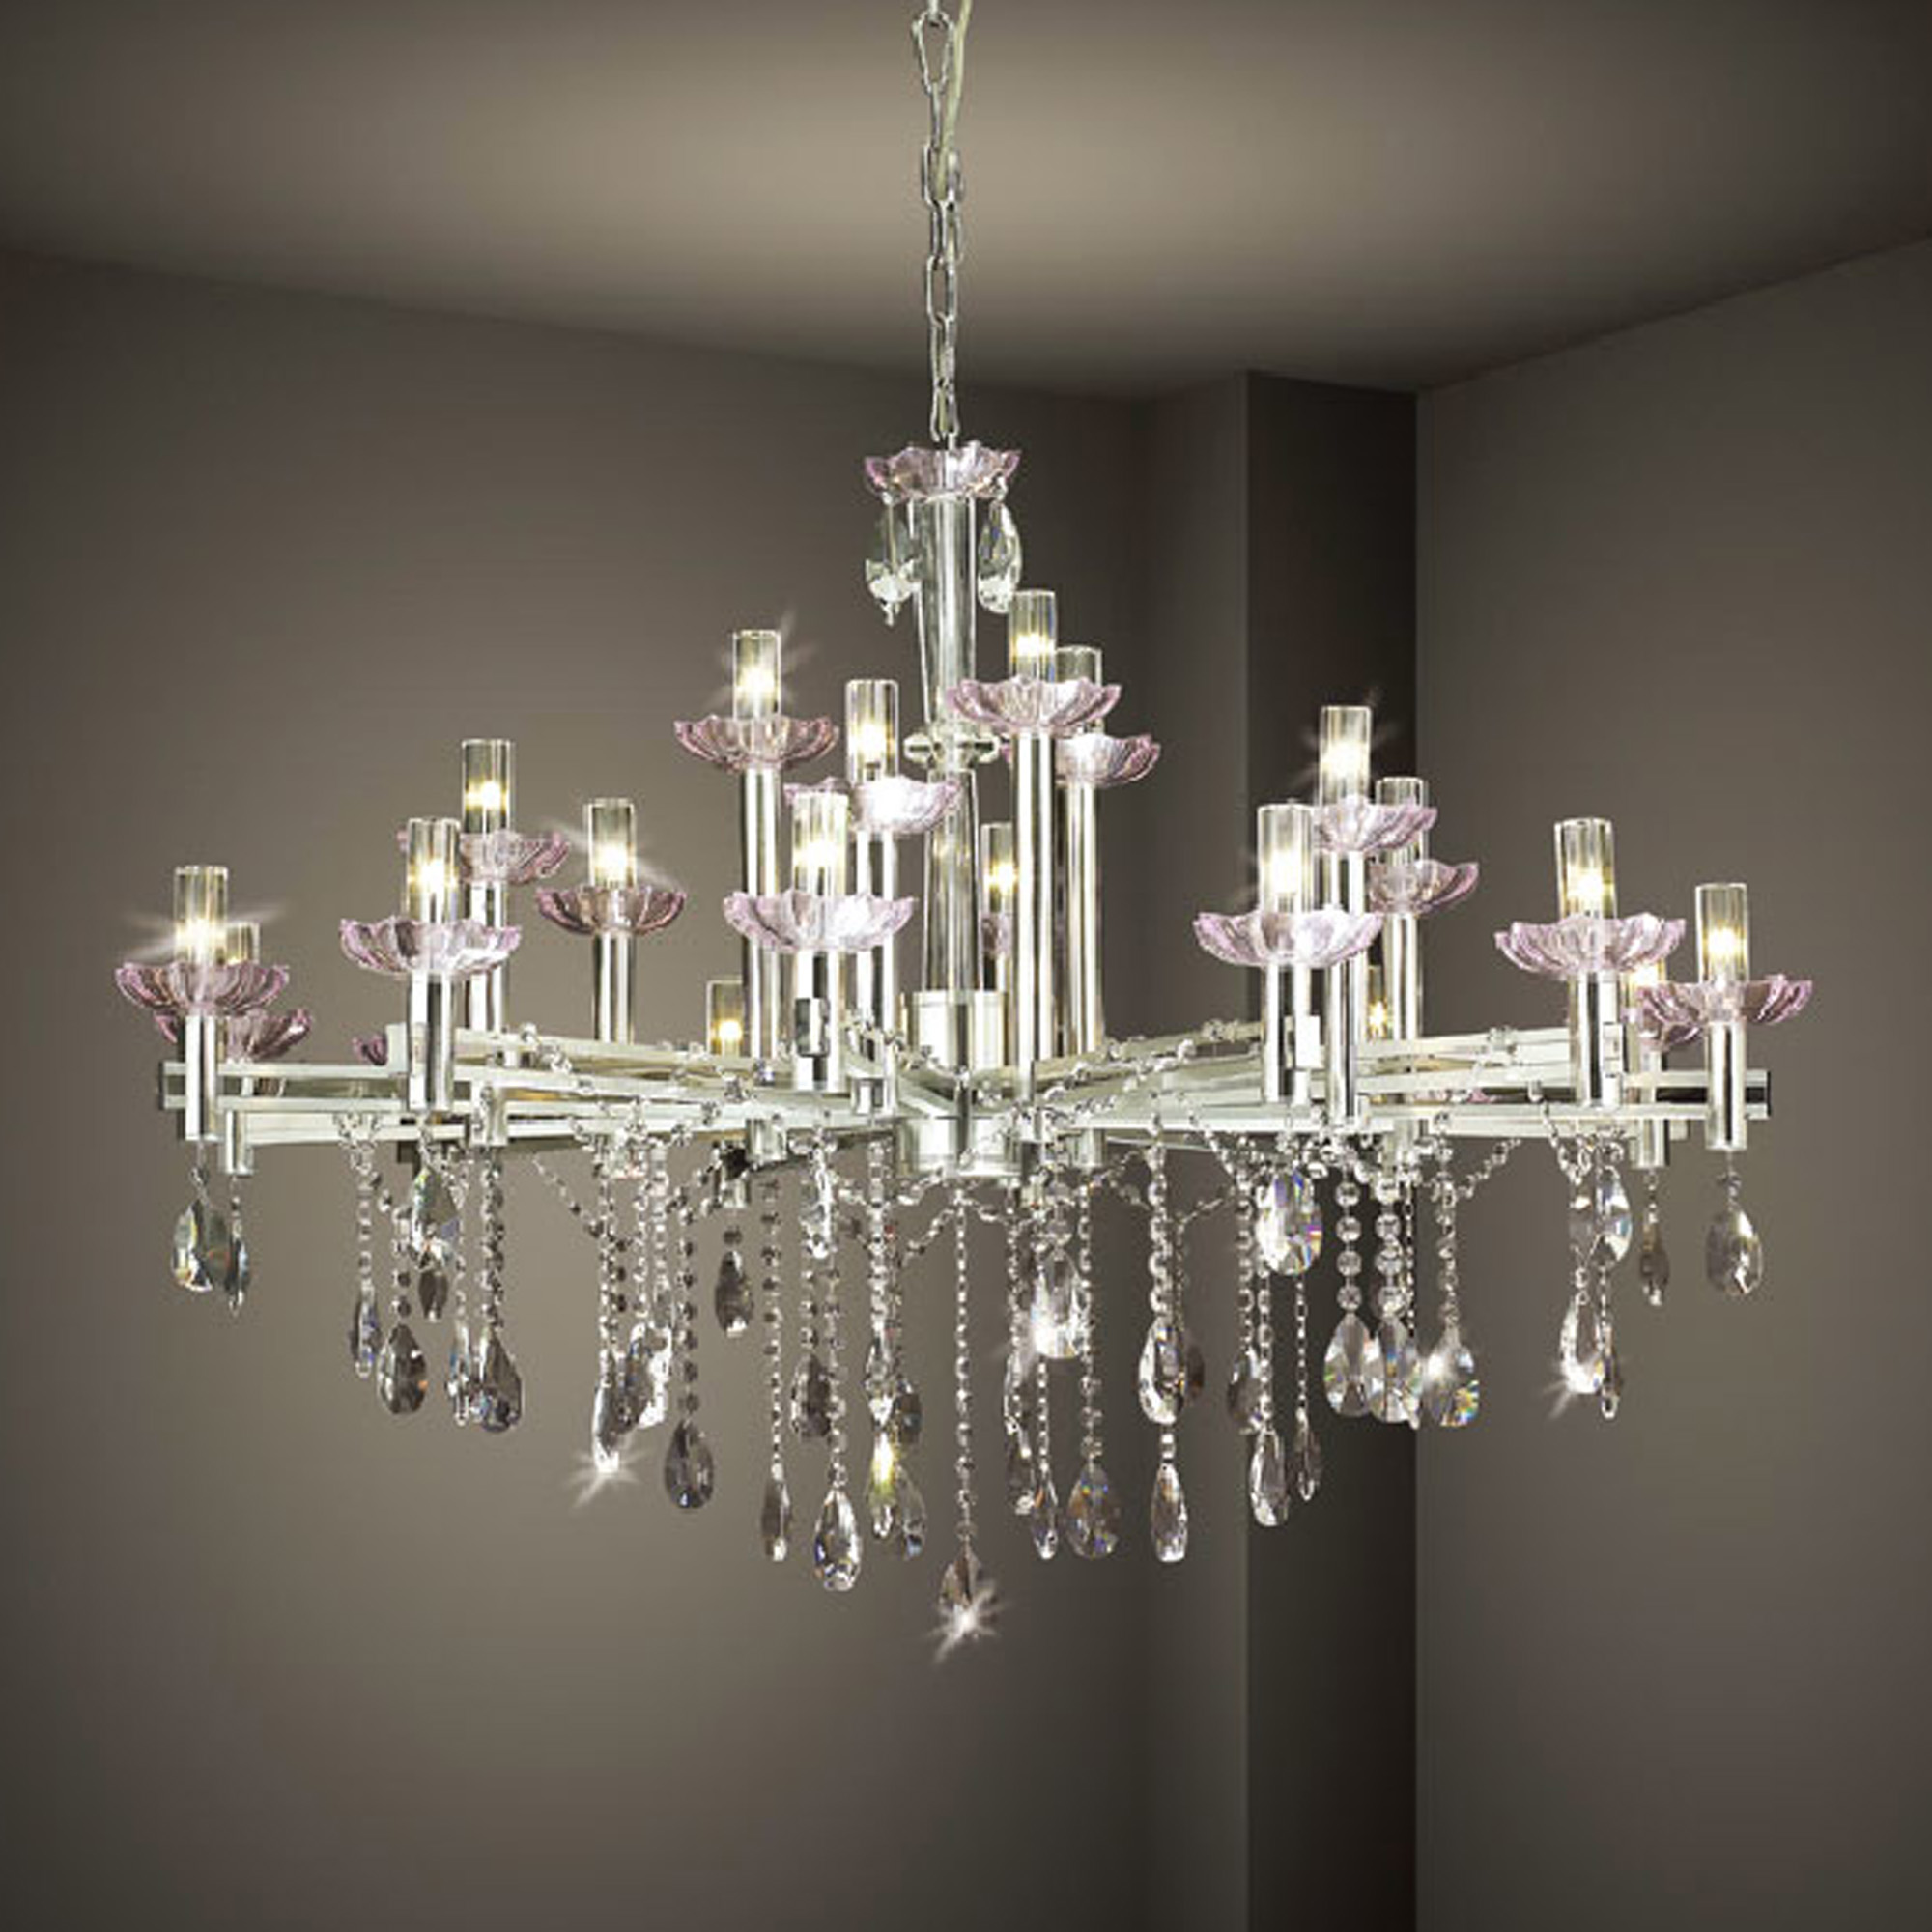 crystal chandelier DP197-1.crystal chandelier DP197   2.for indoor deco.  3.beatiful design  4.start to finish to ensure that every single piece is perfect.